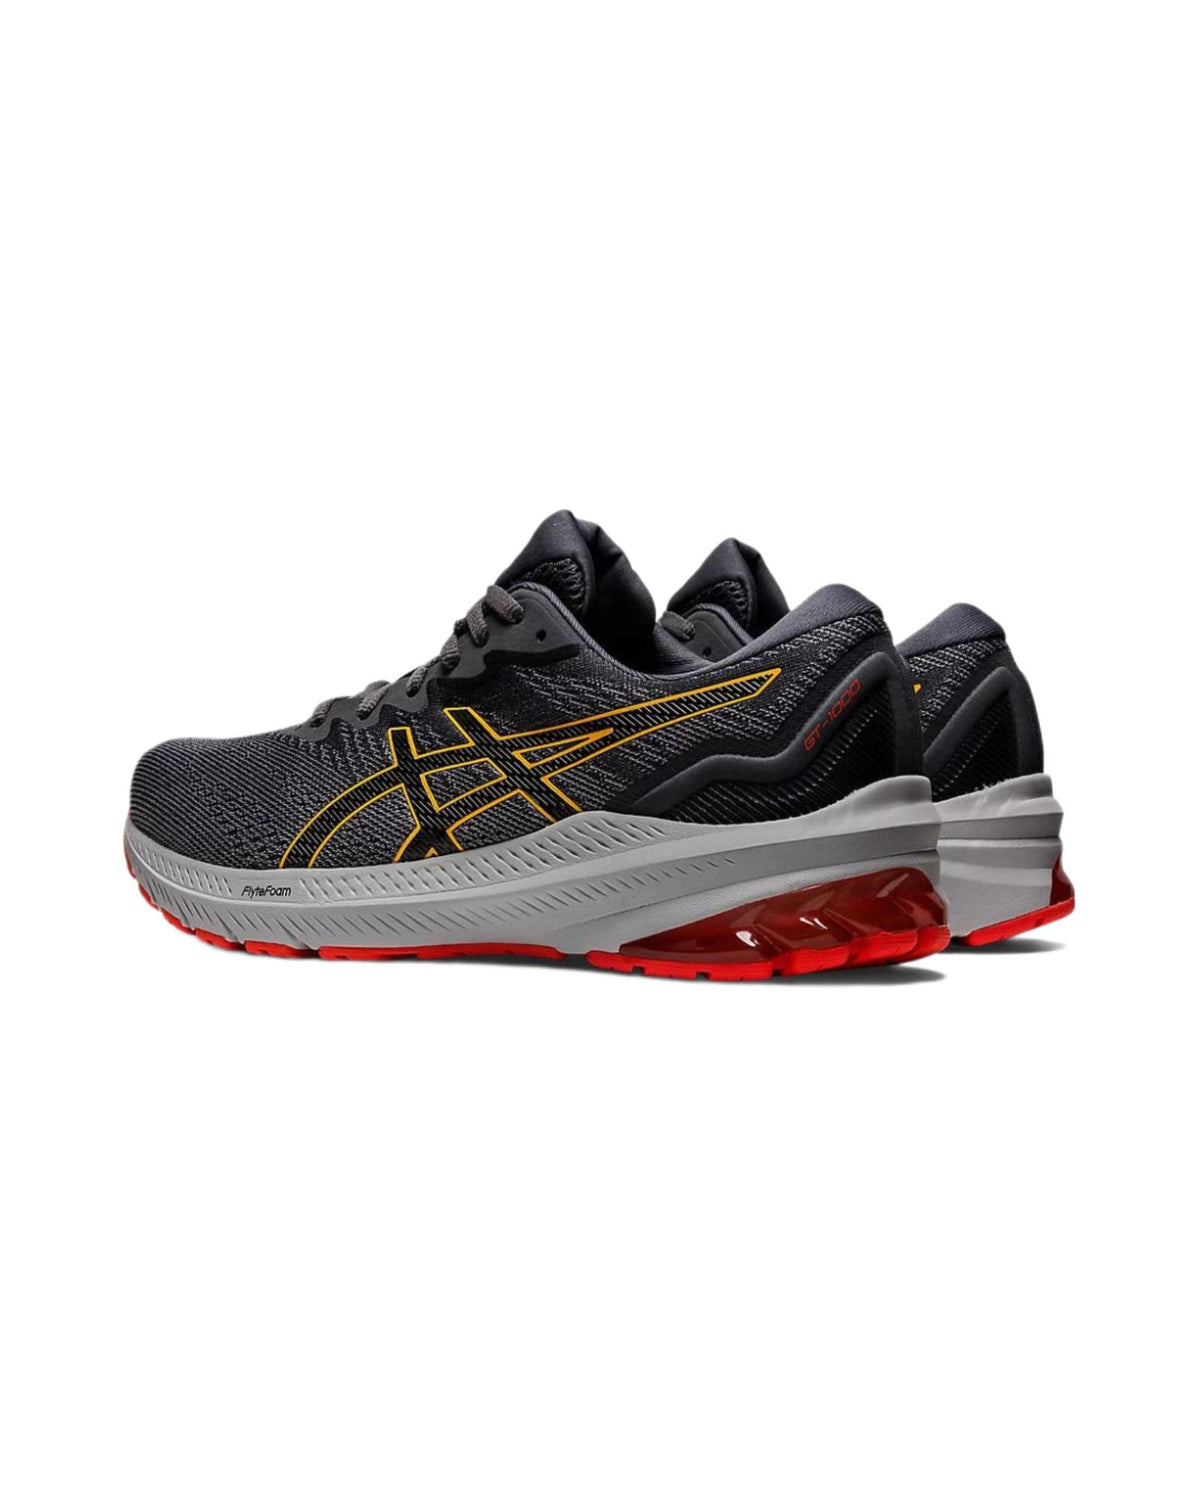 Soft and Smooth Running Shoe with Cushioning Technology - 14 US